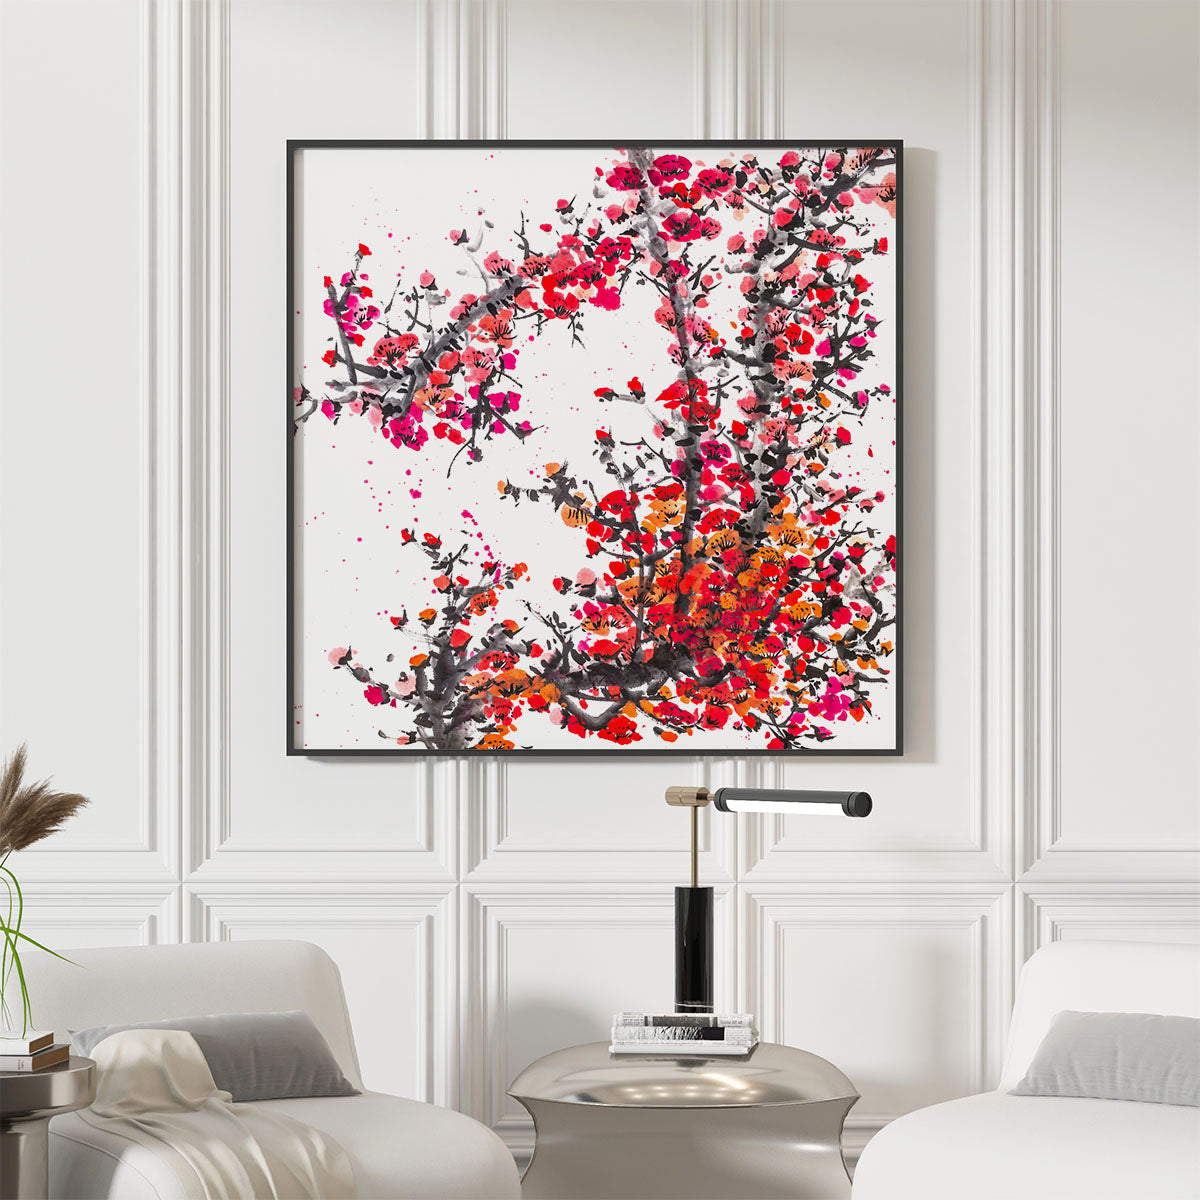 Living room decor with abstract art